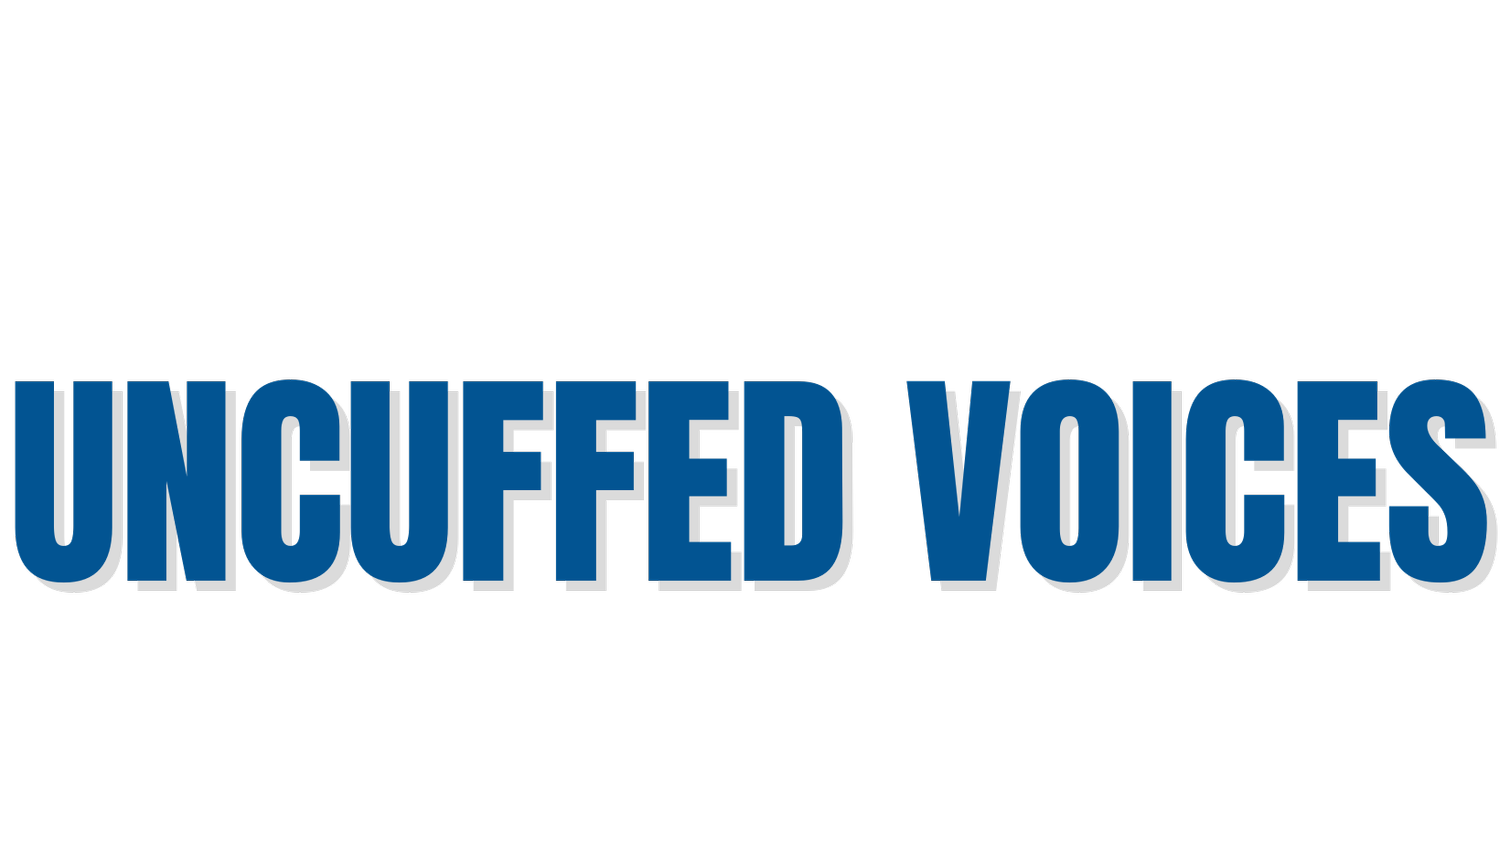 UNCUFFED VOICES